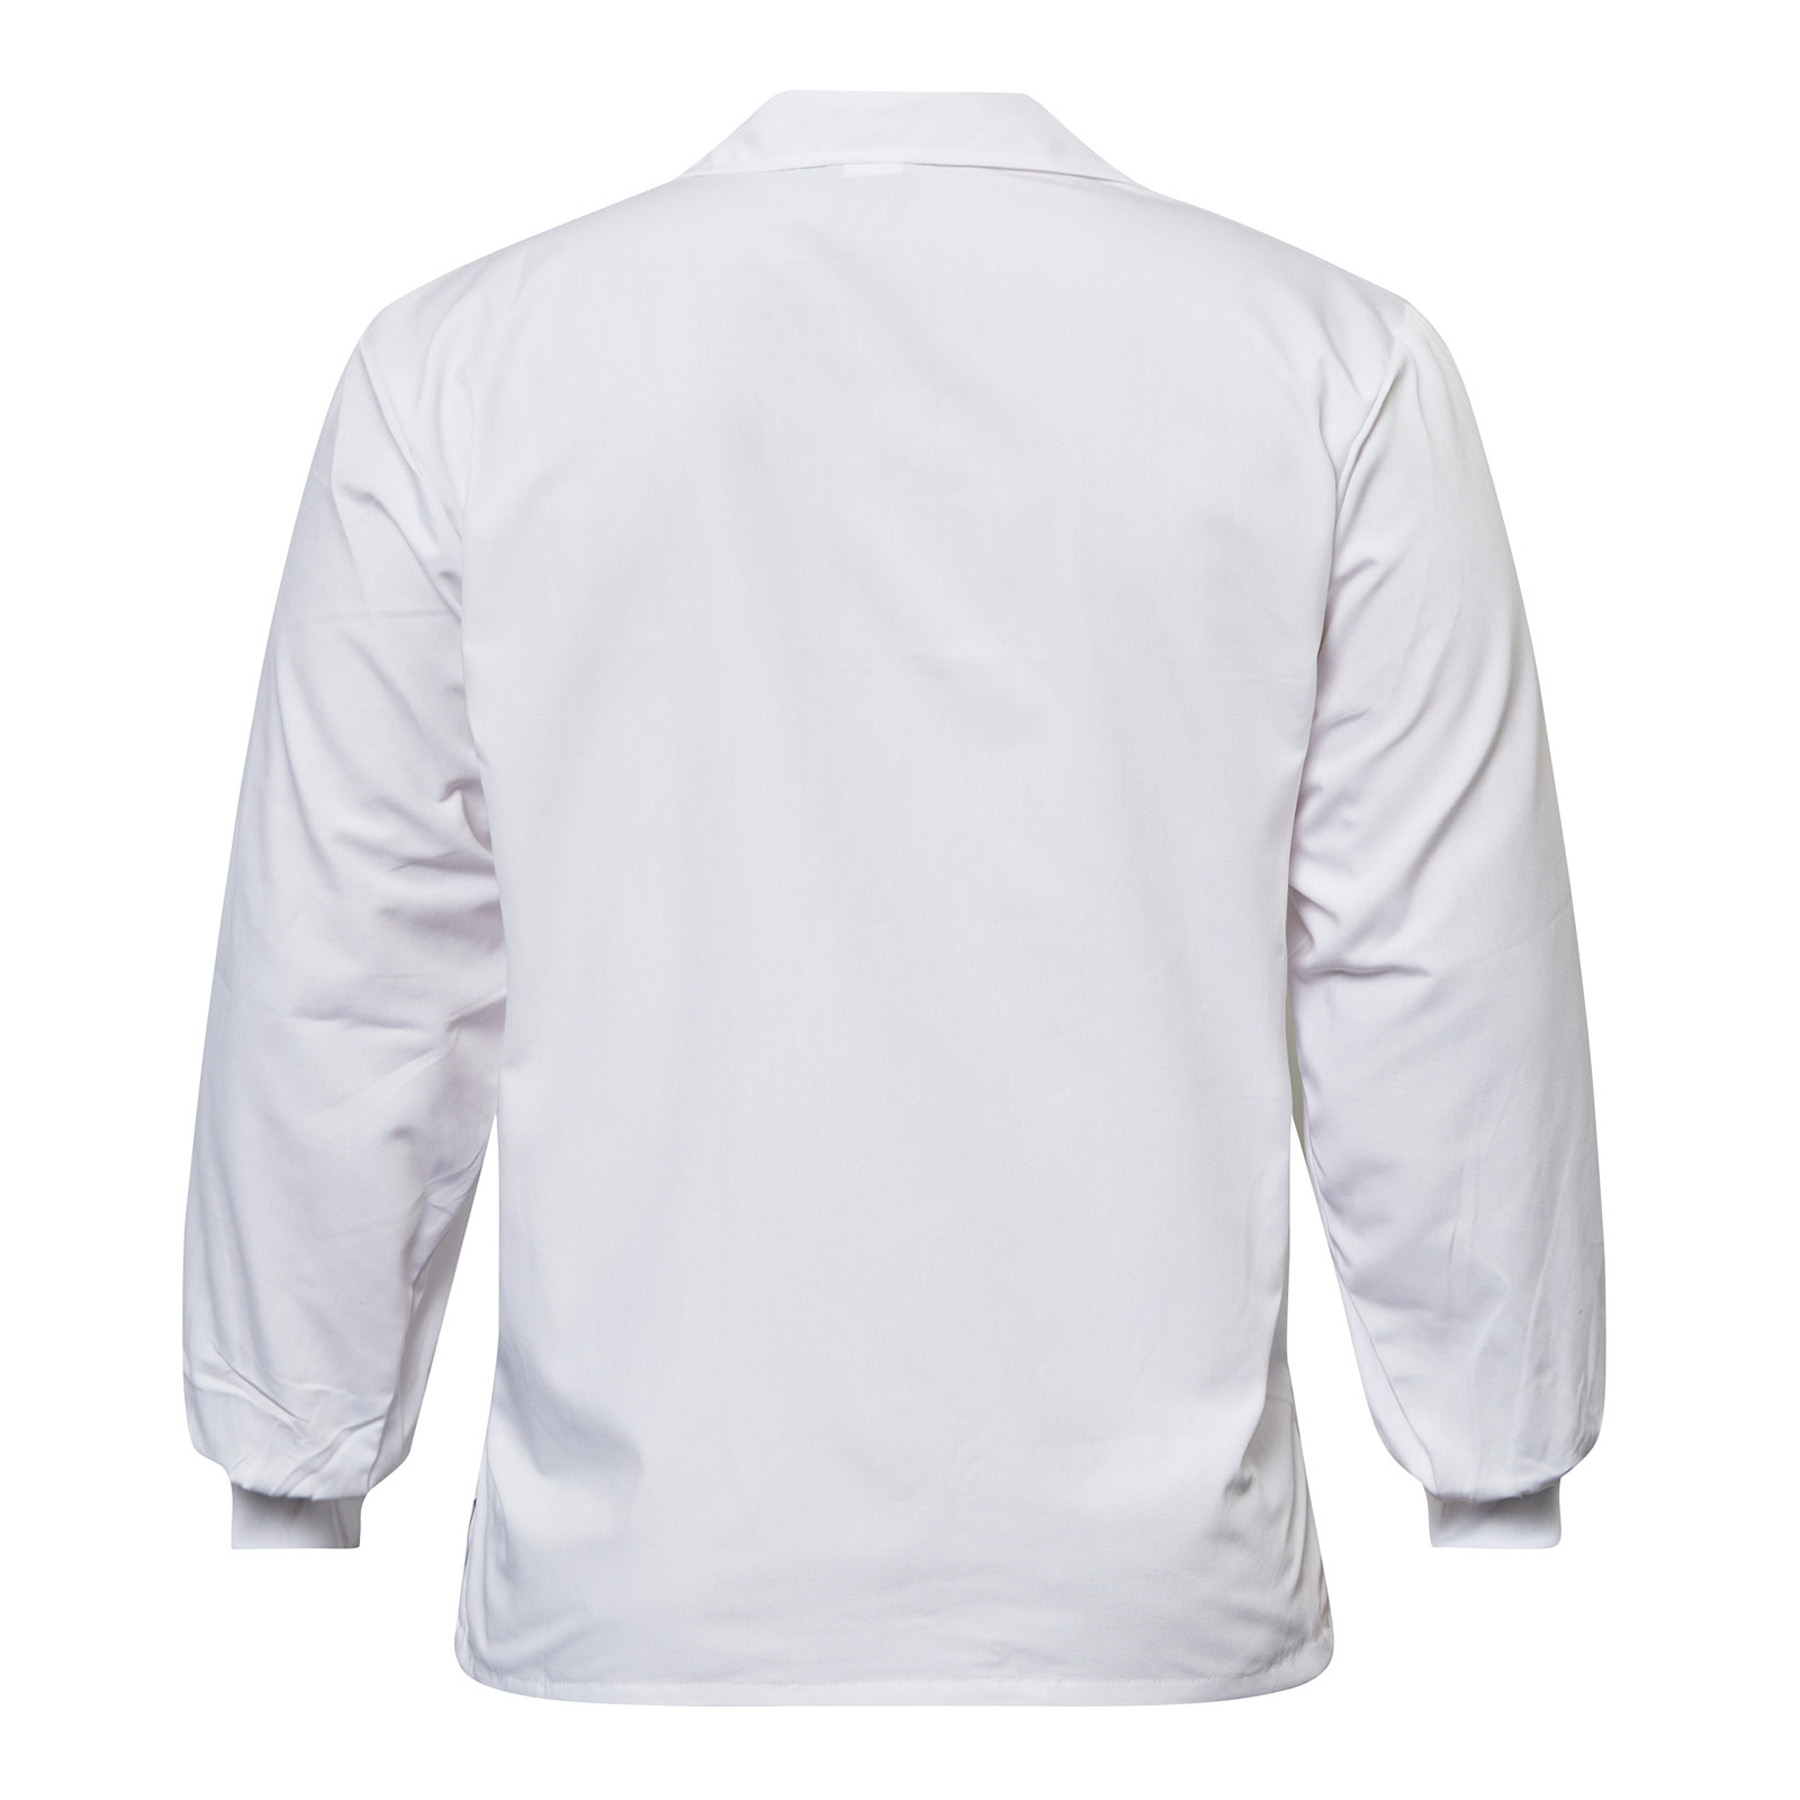 LONG SLEEVE FOOD INDUSTRY JACSHIRT WITH MODESTY NECK INSERT - workcraft